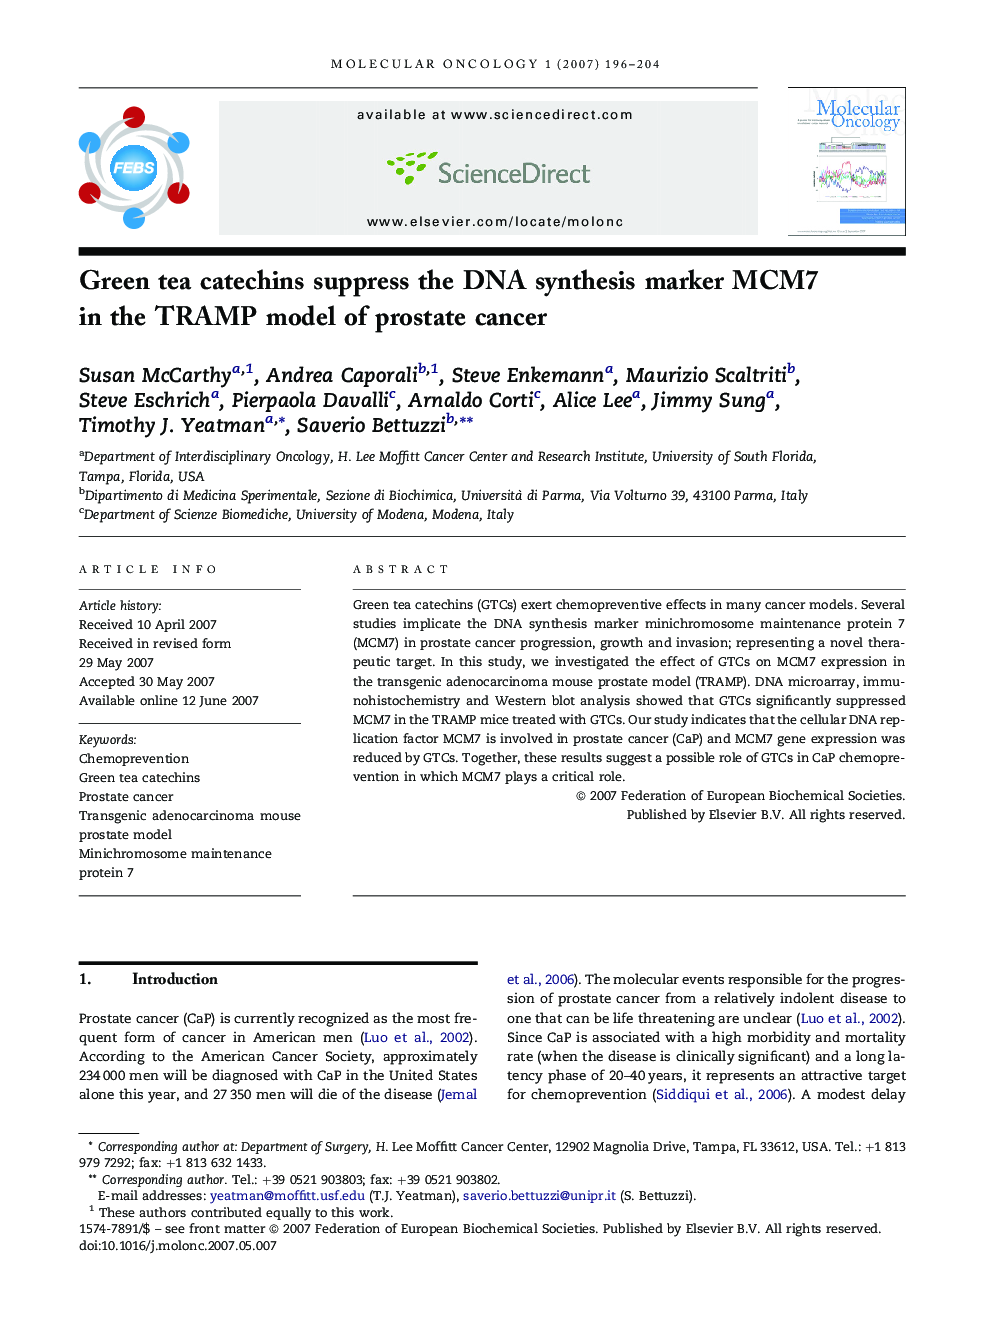 Green tea catechins suppress the DNA synthesis marker MCM7 in the TRAMP model of prostate cancer